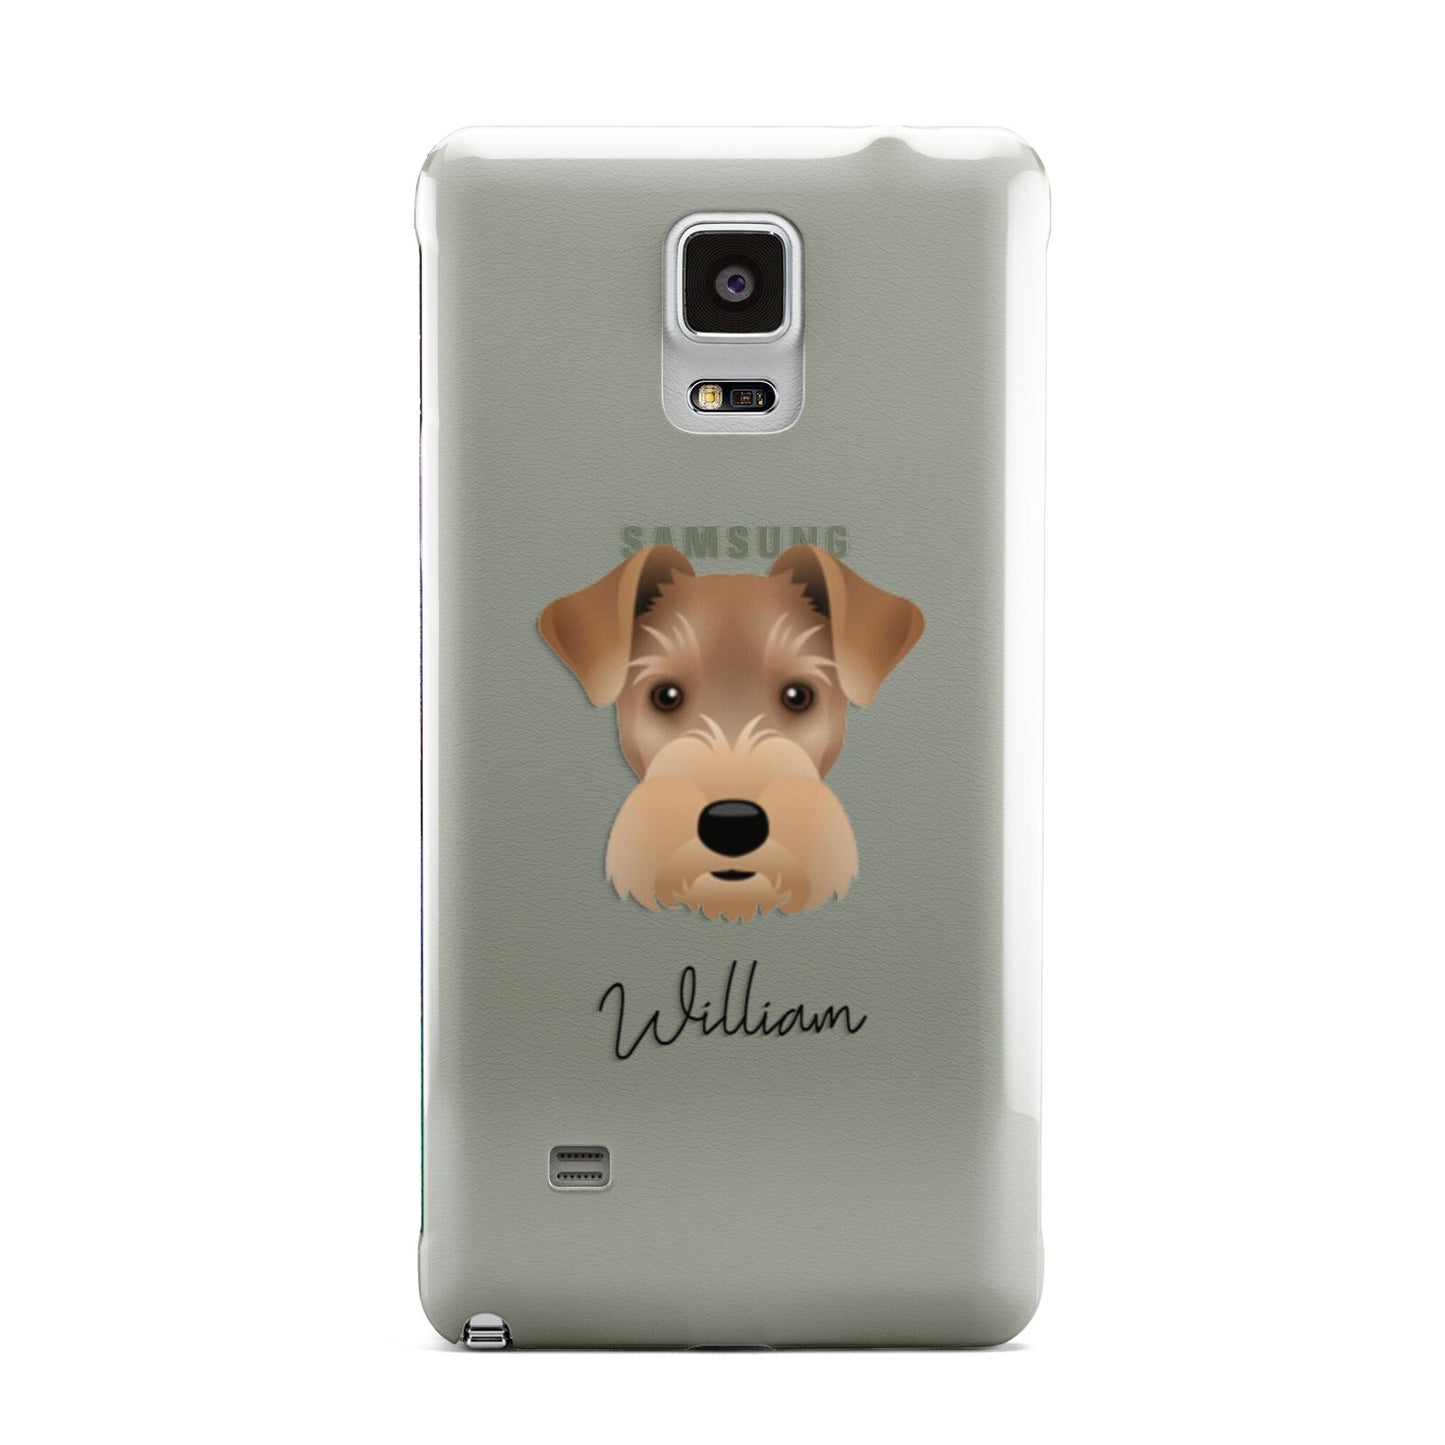 Welsh Terrier Personalised Samsung Galaxy Note 4 Case